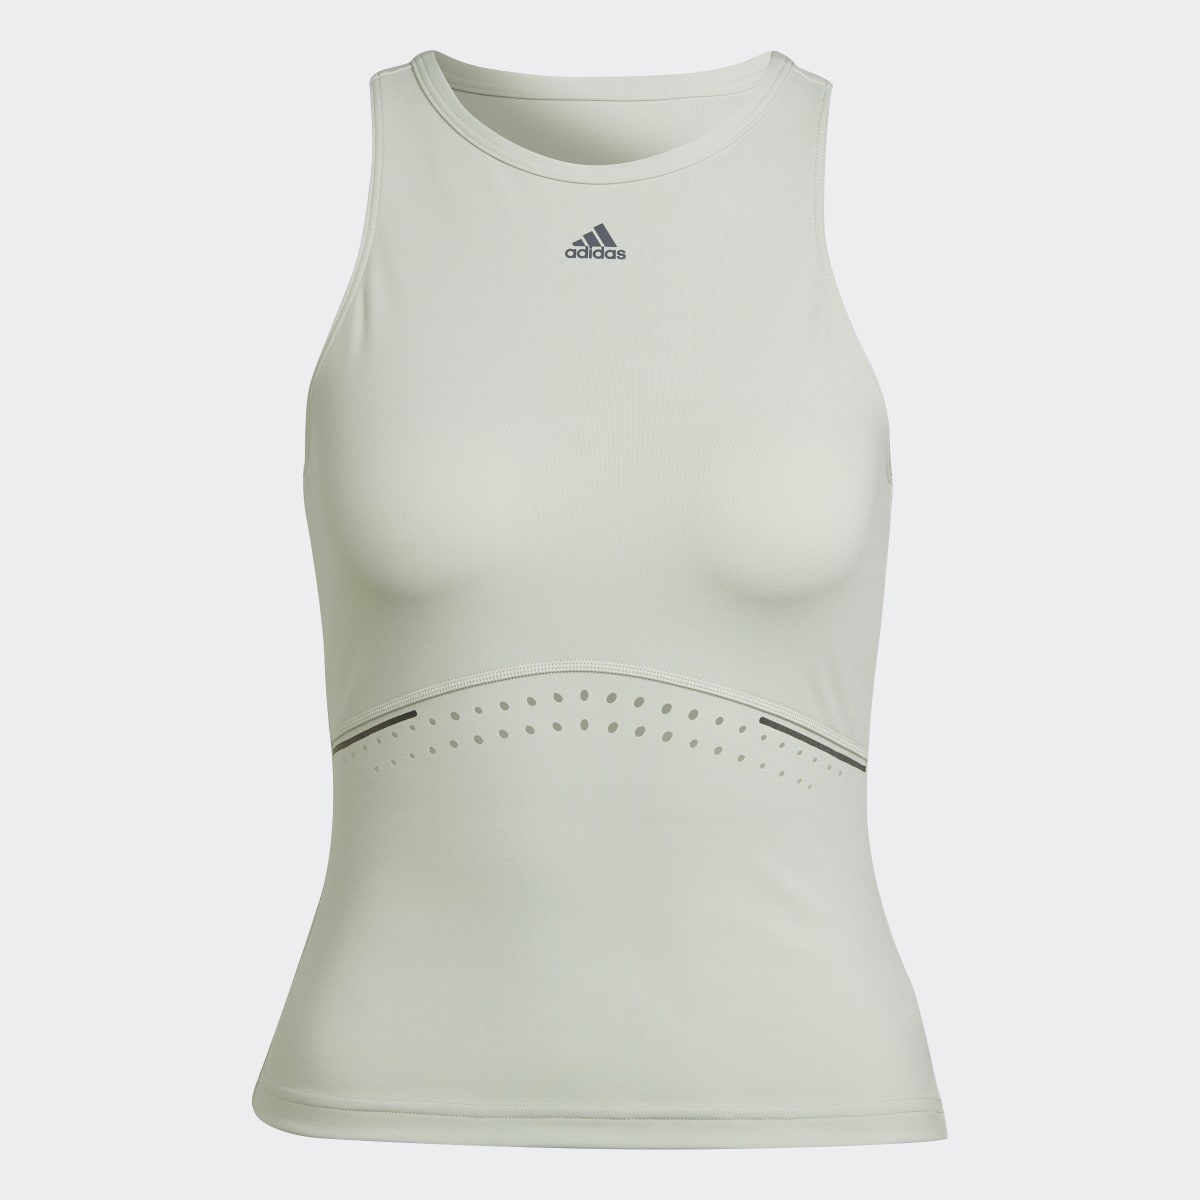 Adidas HIIT 45 Seconds Fitted Tank Top. 5